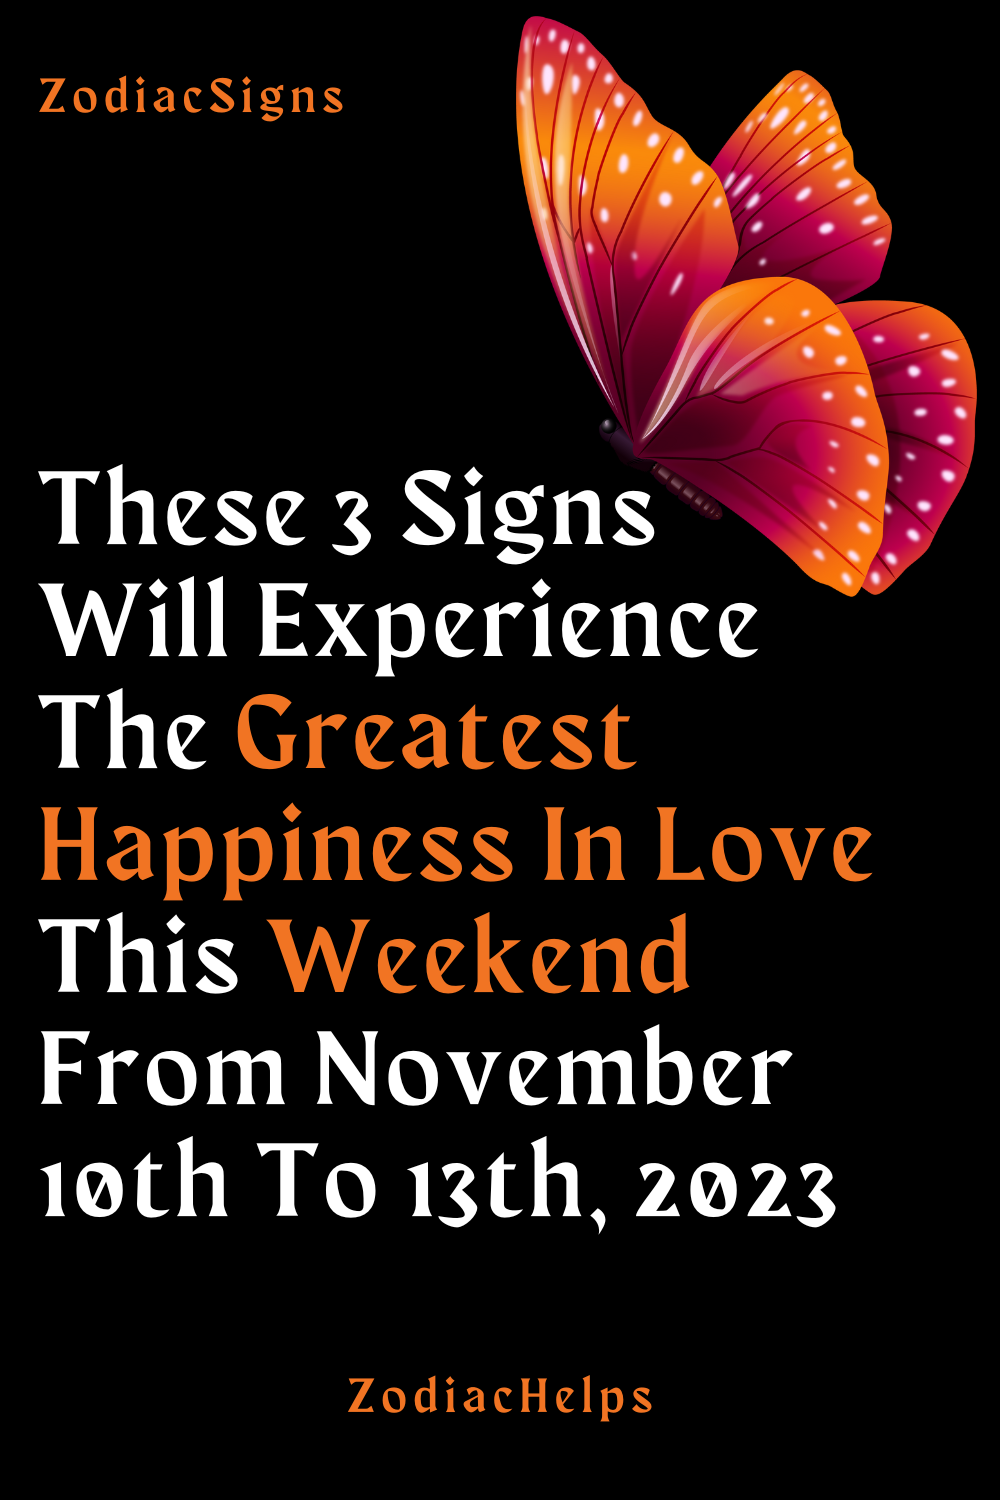 These 3 Signs Will Experience The Greatest Happiness In Love This Weekend From November 10th To 13th, 2023